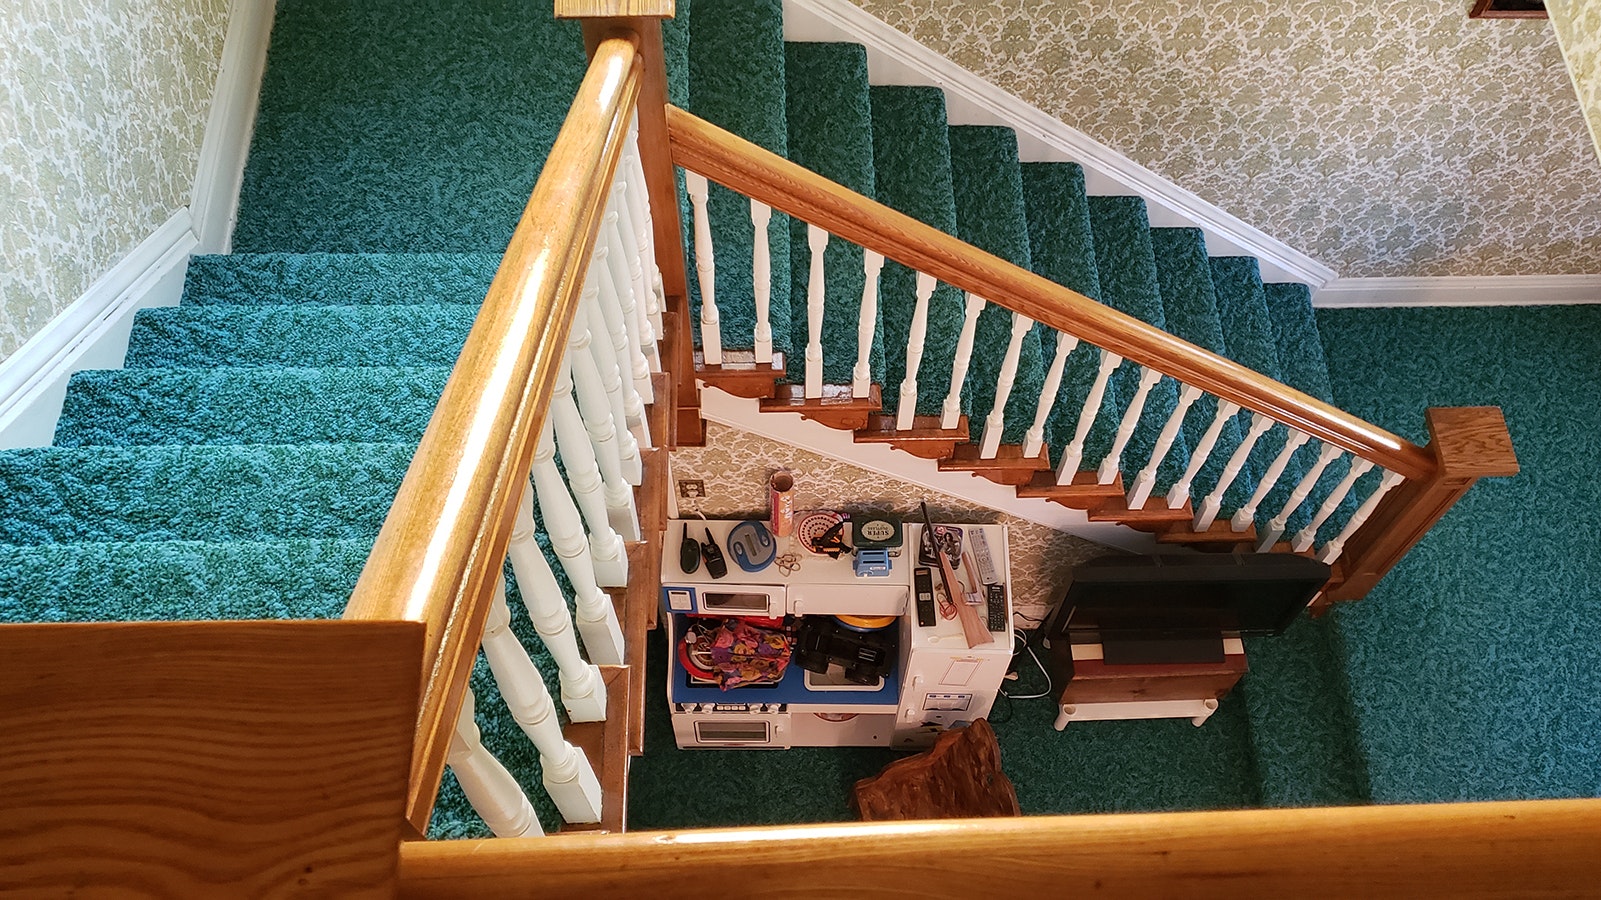 One of two stairwells leading downstairs .A child's play area has been placed in the cubby at the bottom.